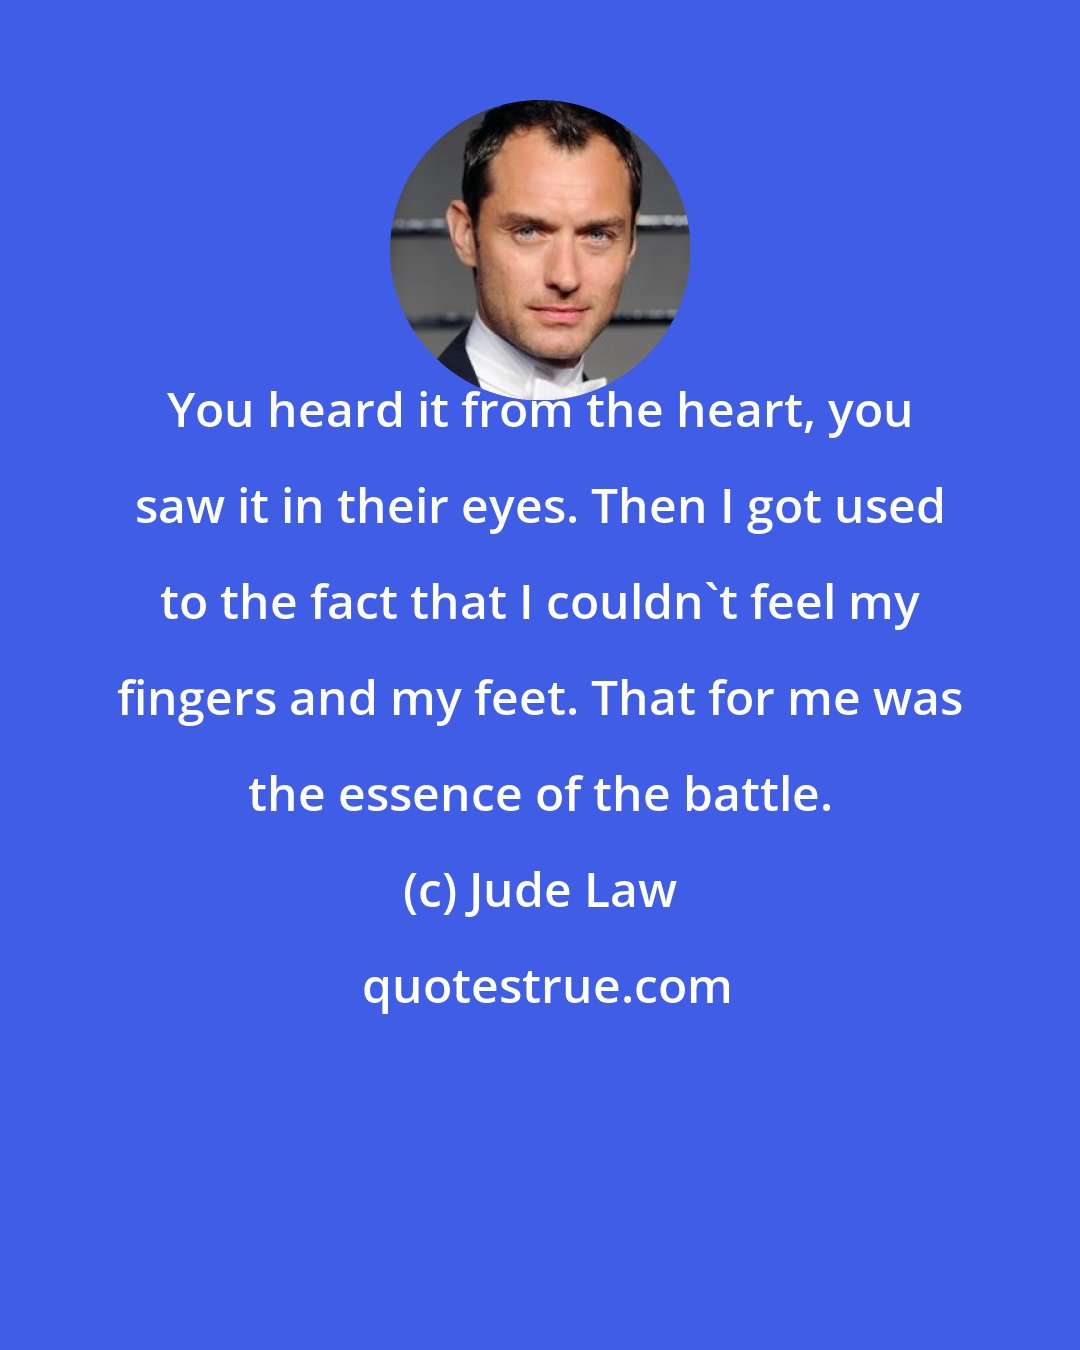 Jude Law: You heard it from the heart, you saw it in their eyes. Then I got used to the fact that I couldn't feel my fingers and my feet. That for me was the essence of the battle.